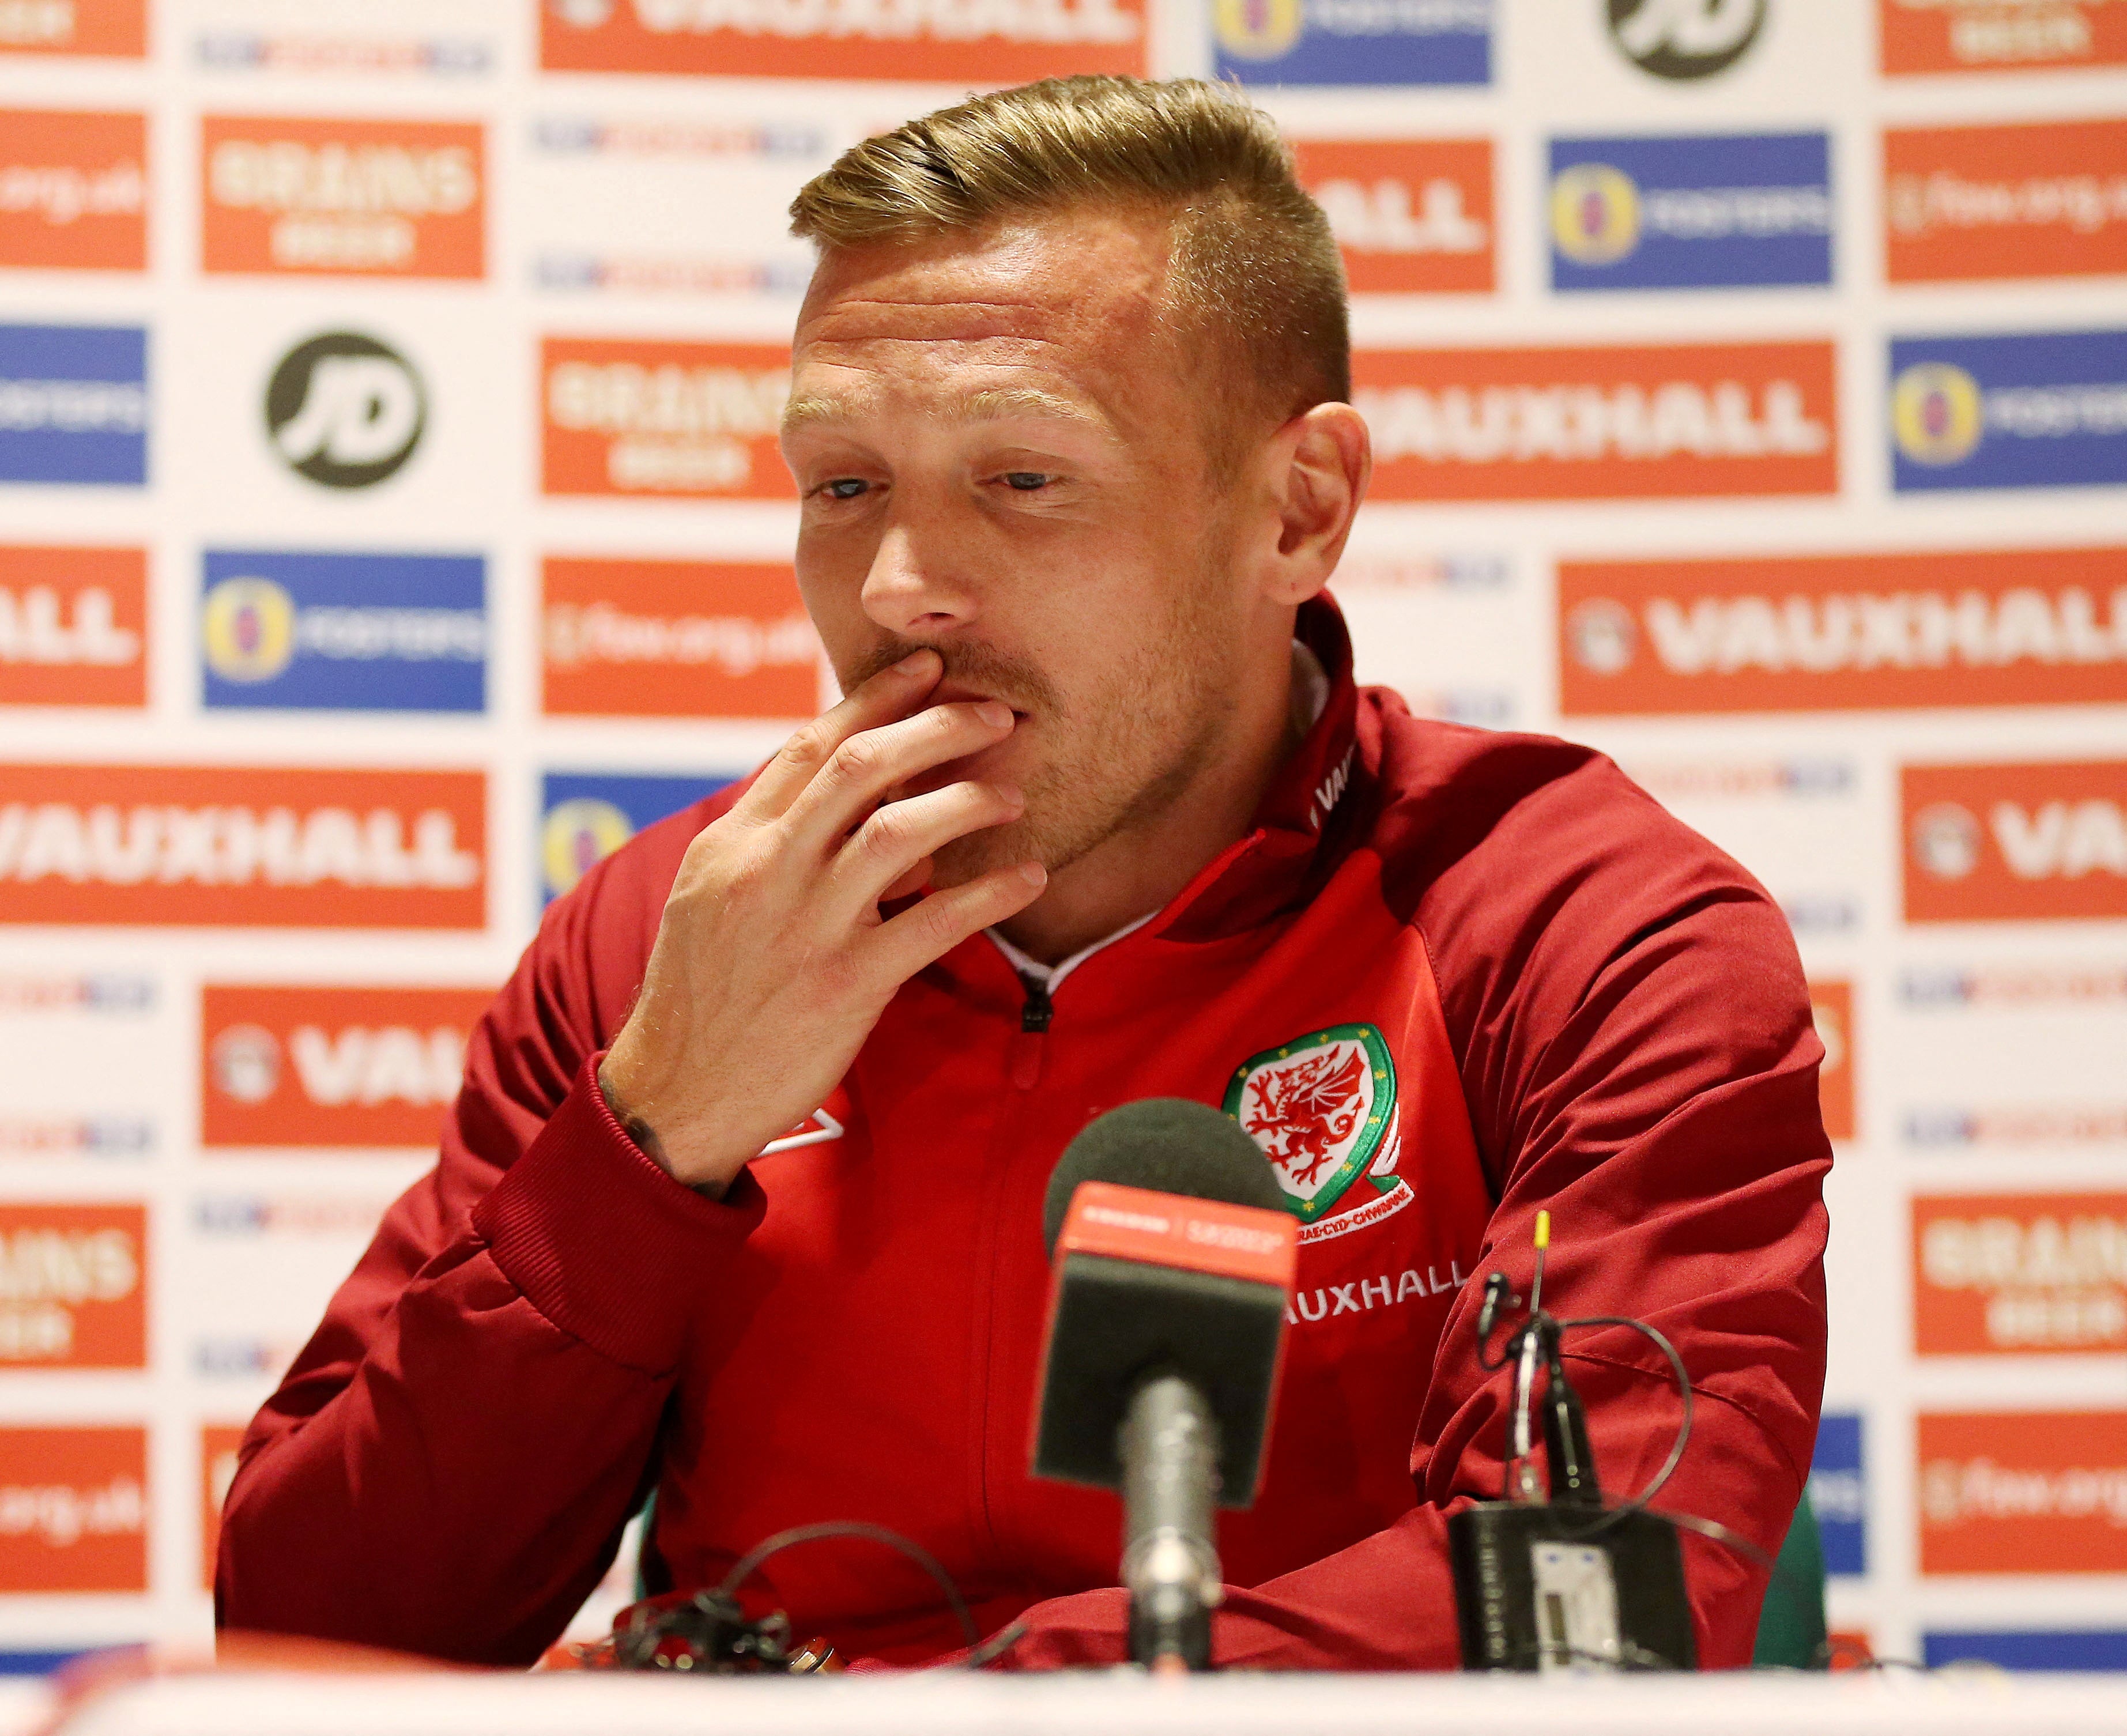 Craig Bellamy replaces Rob Page as Wales’ head coach